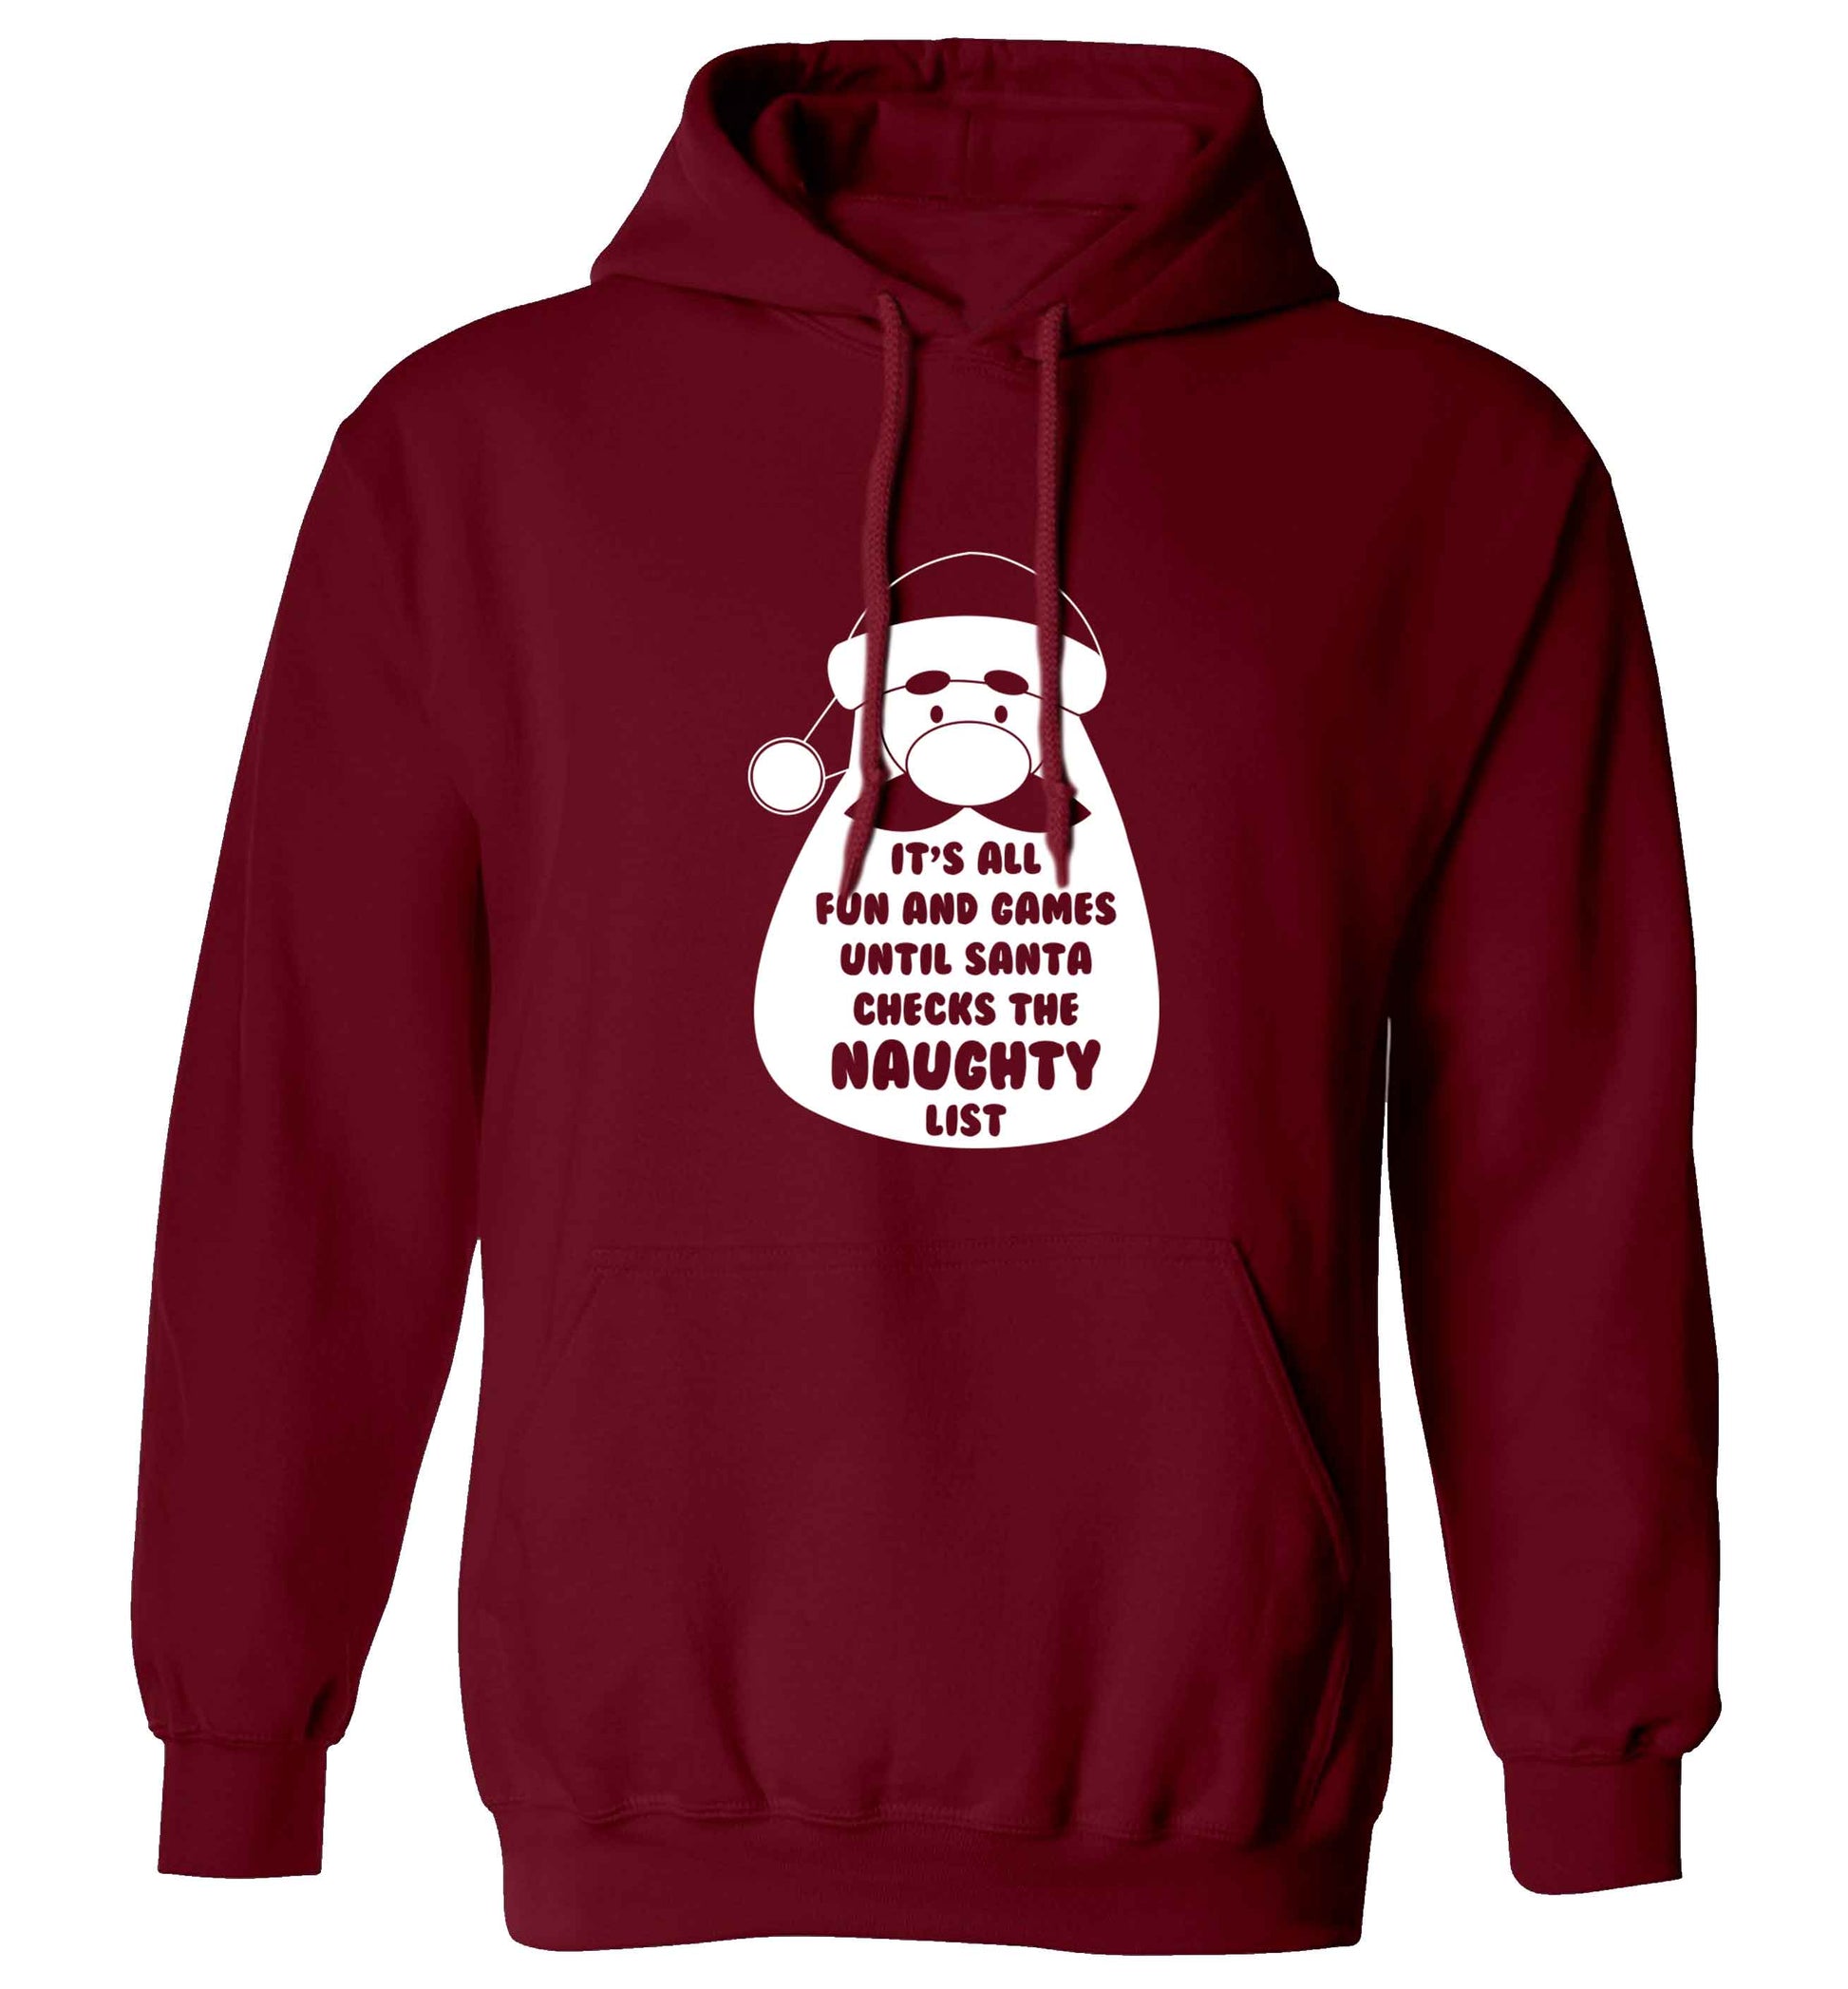 It's all fun and games until Santa checks the naughty list adults unisex maroon hoodie 2XL